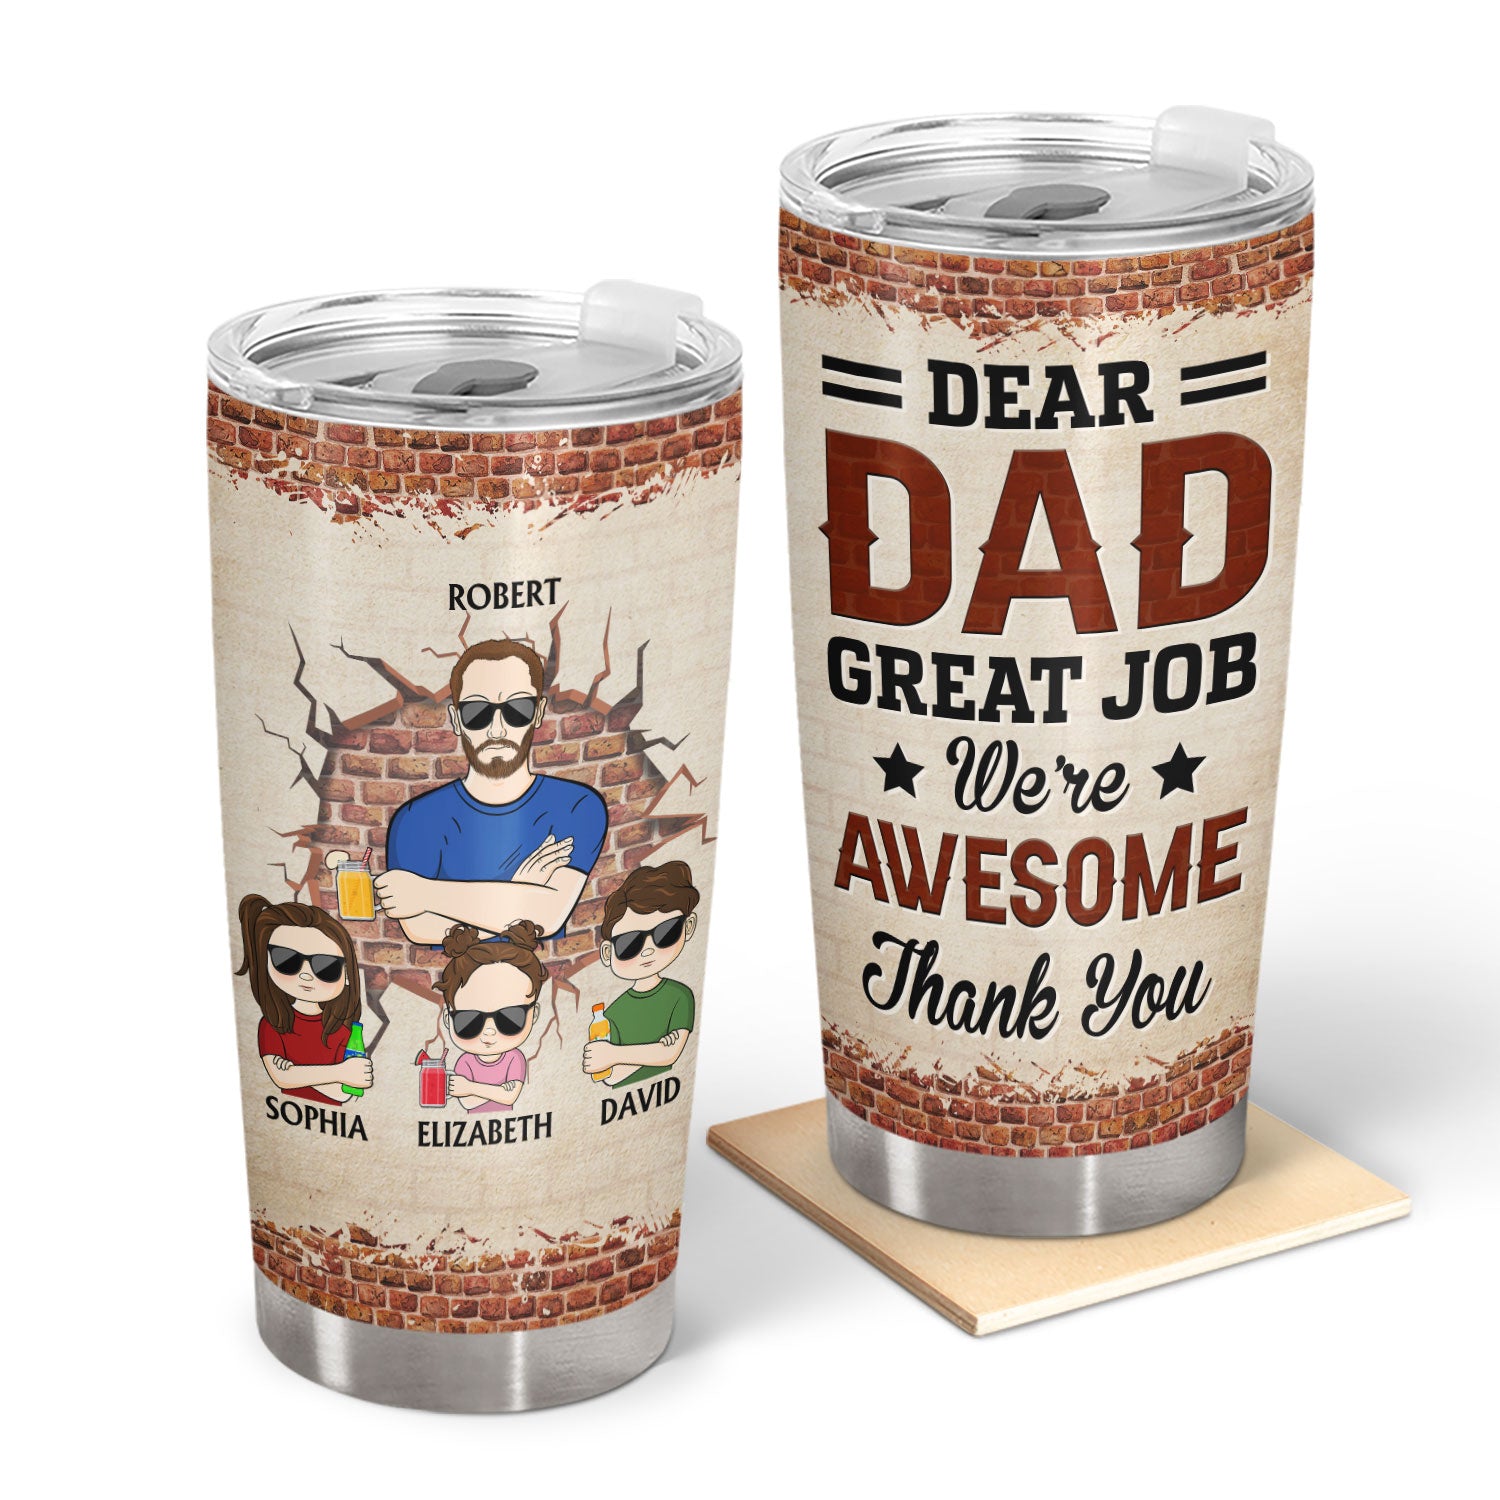 Dear Dad Great Job We're Awesome Thank You - Funny, Birthday Gift For Father, Husband - Personalized Custom Tumbler